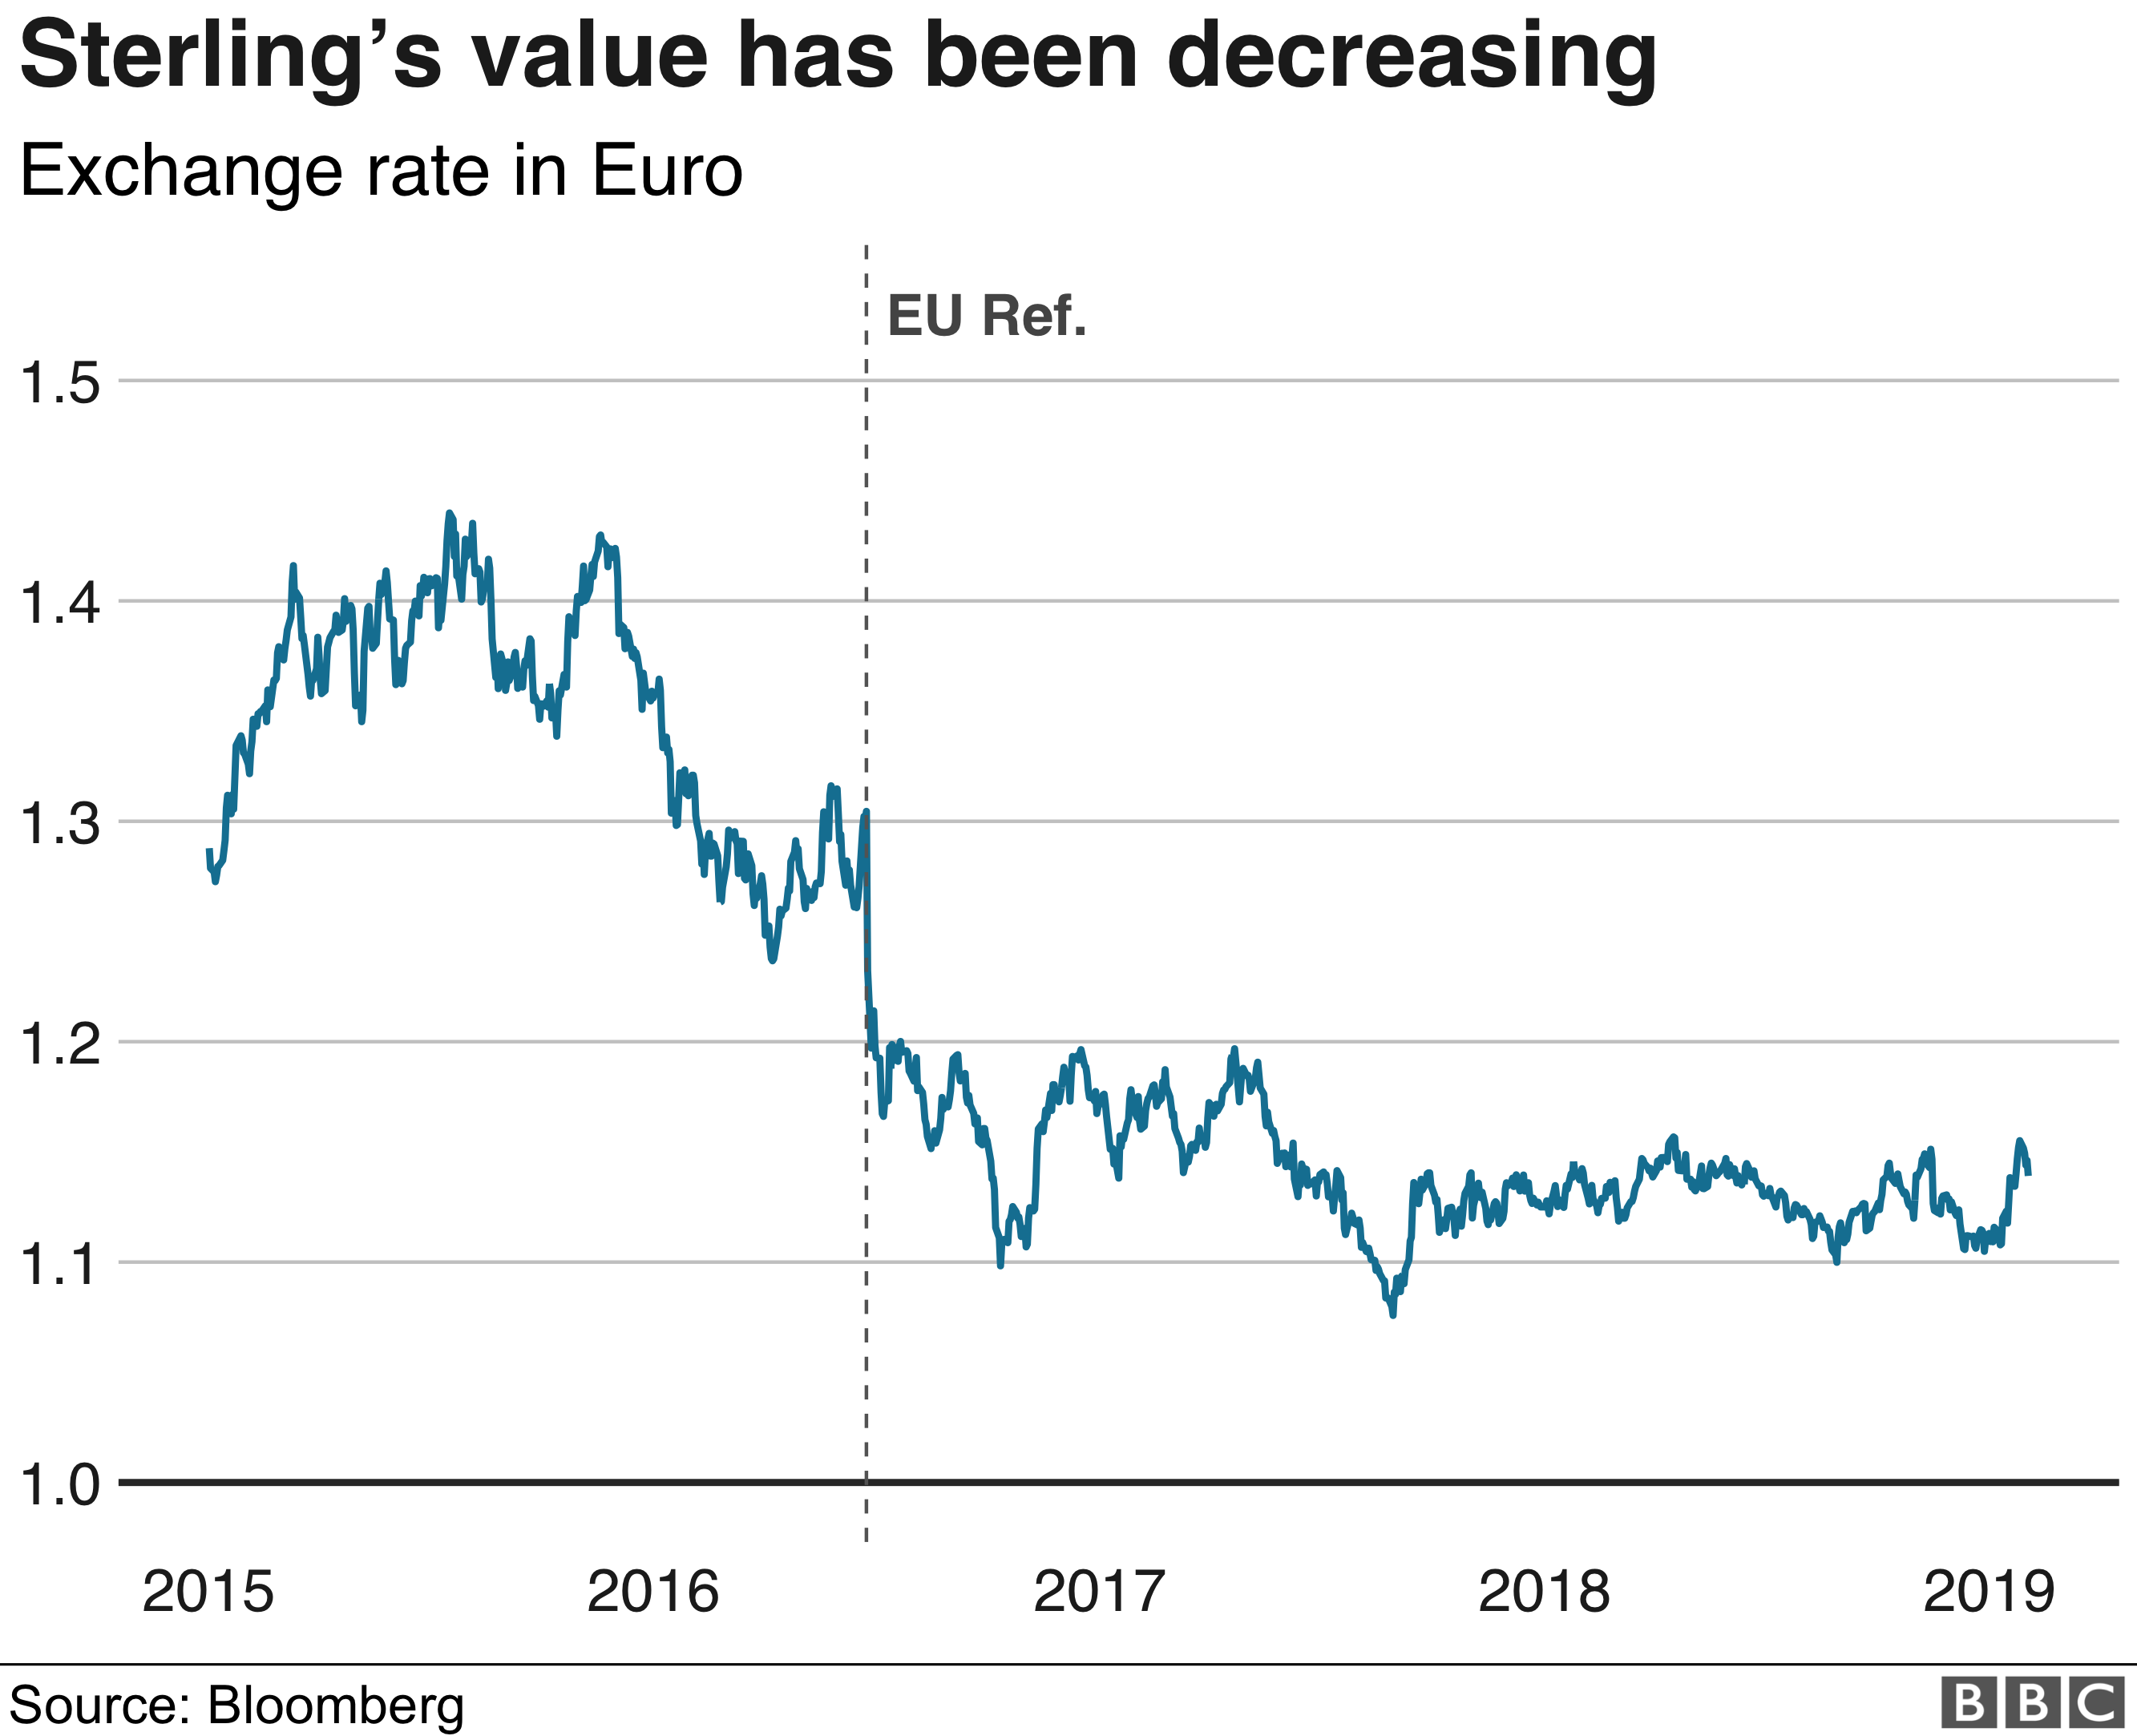 Chart showing the value of the exchange rate between GBP and EUR since 2015.